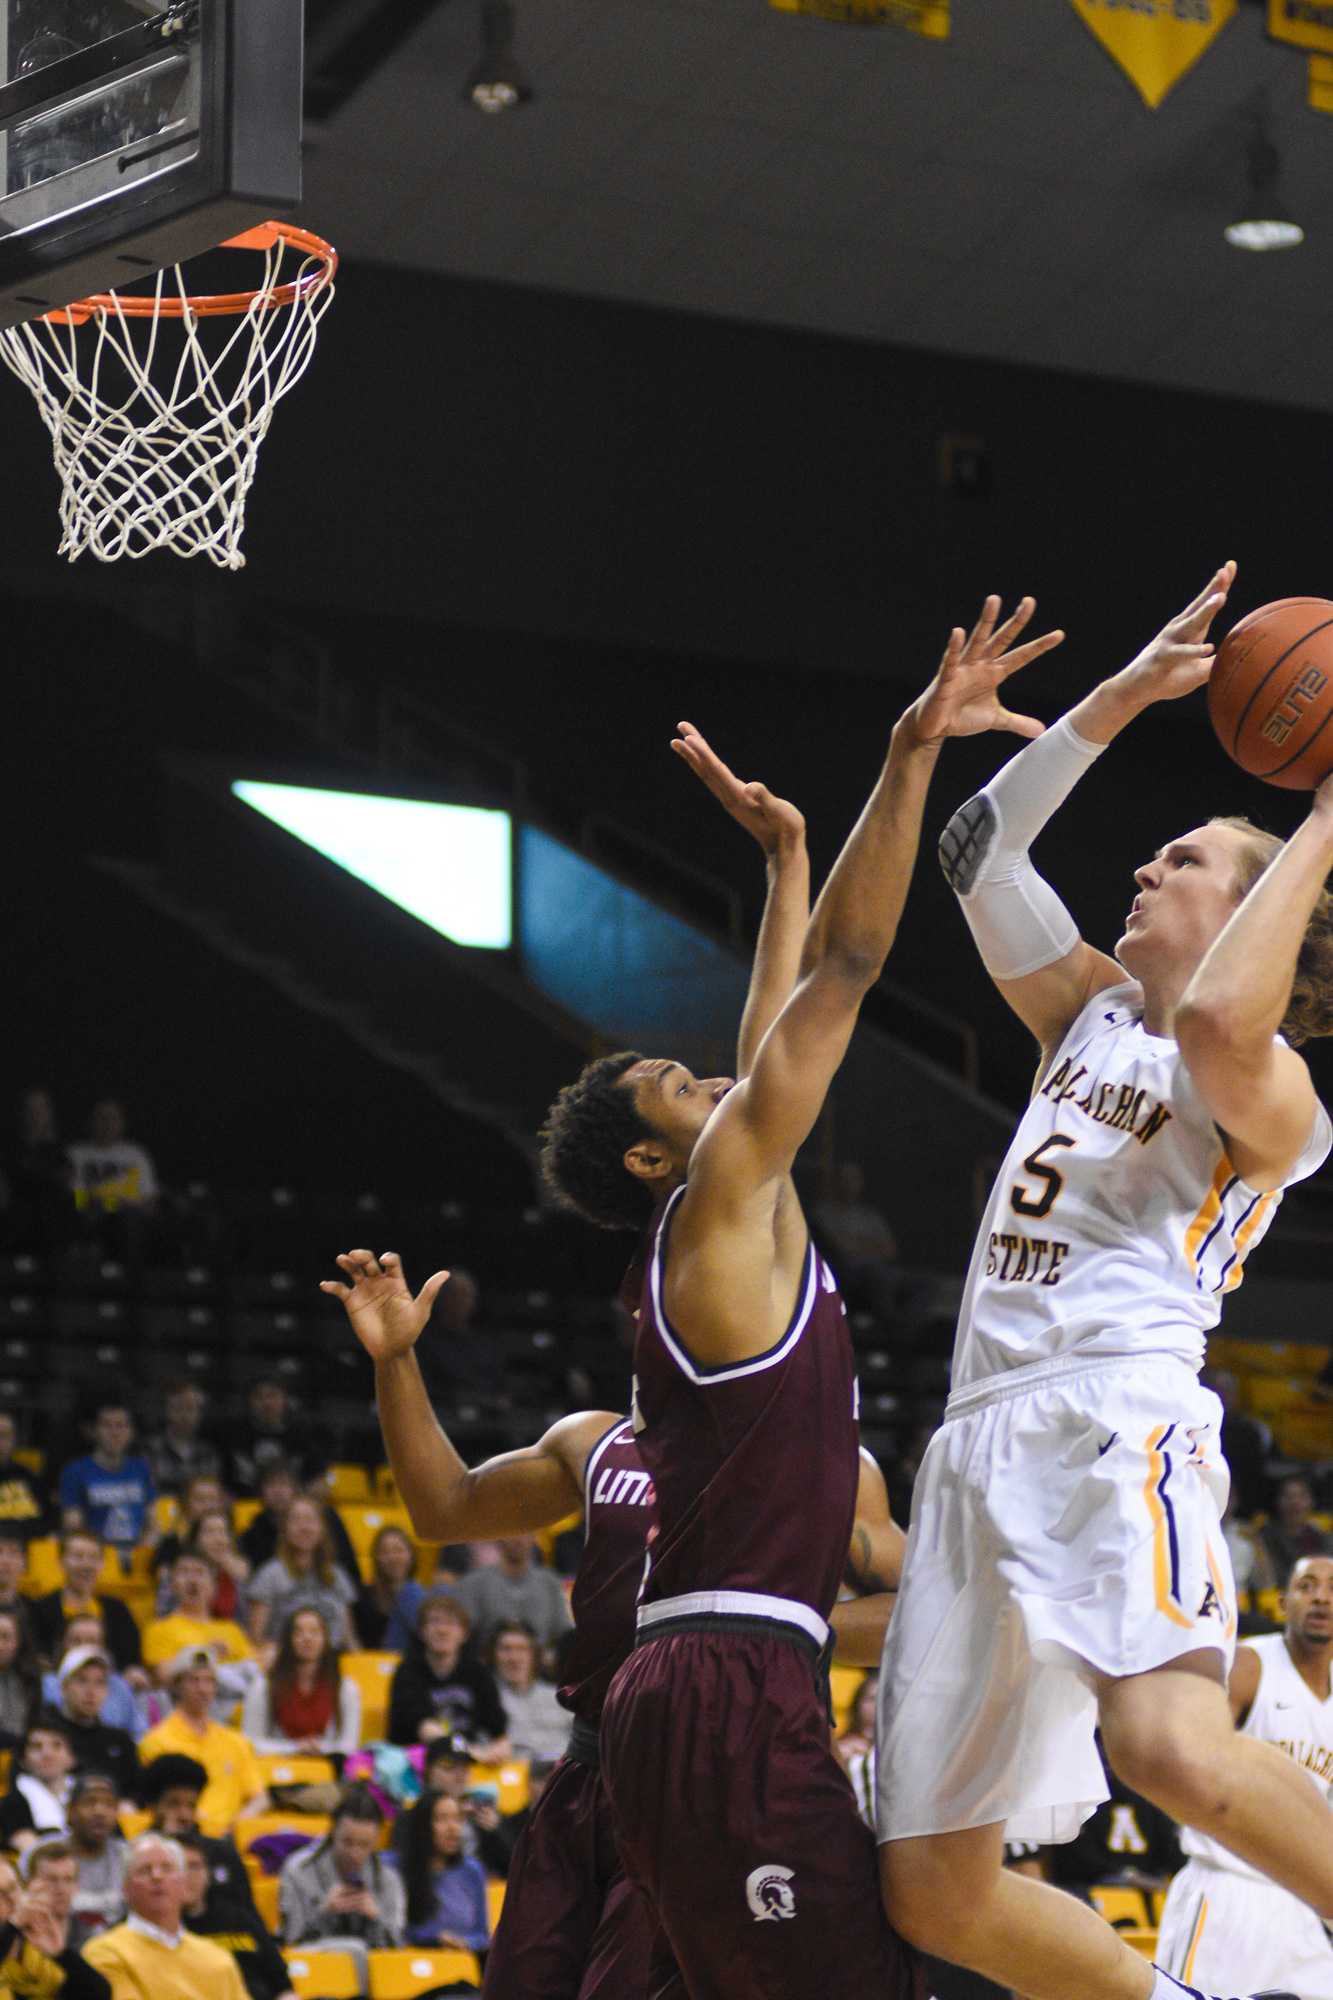 Junior foward, Griffin Kinney, shoots the ball during the game against Little Rock last season. He is one of the first players that Jim Fox recruited at Appalachian State.